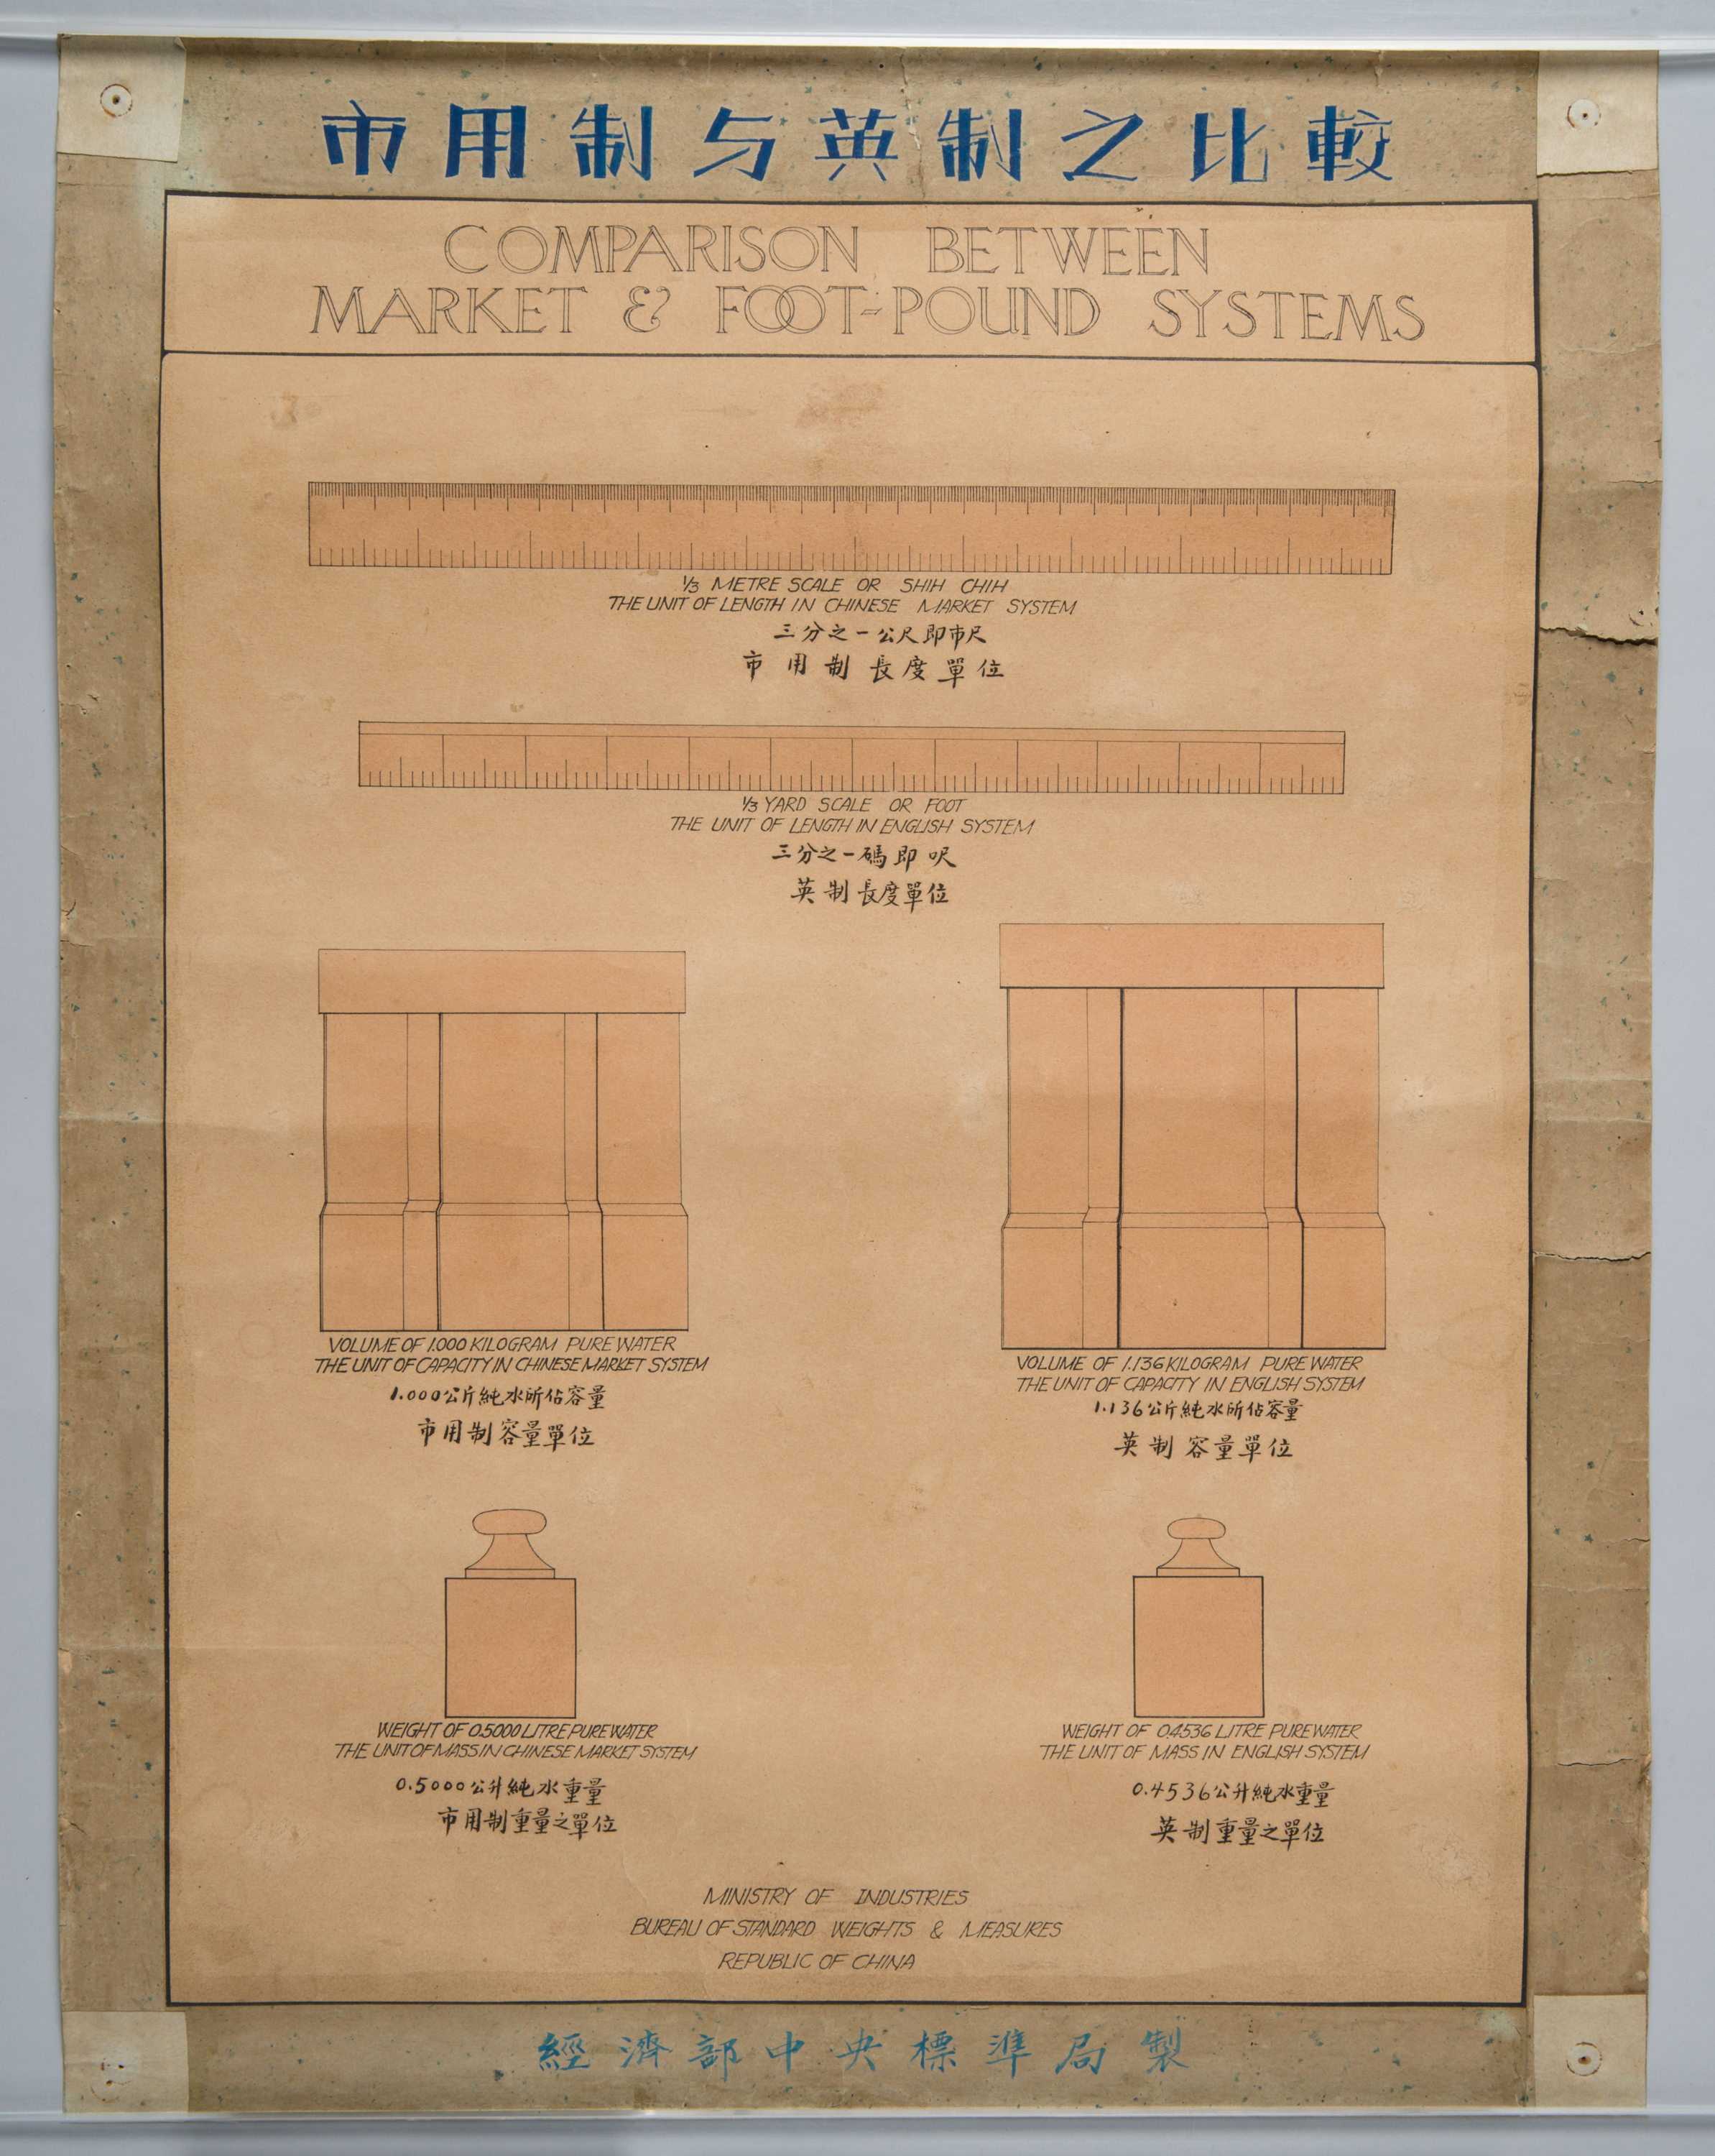 One of posters about weights and measures by  the National Bureau of Weights and Measures,Total 3 pictures